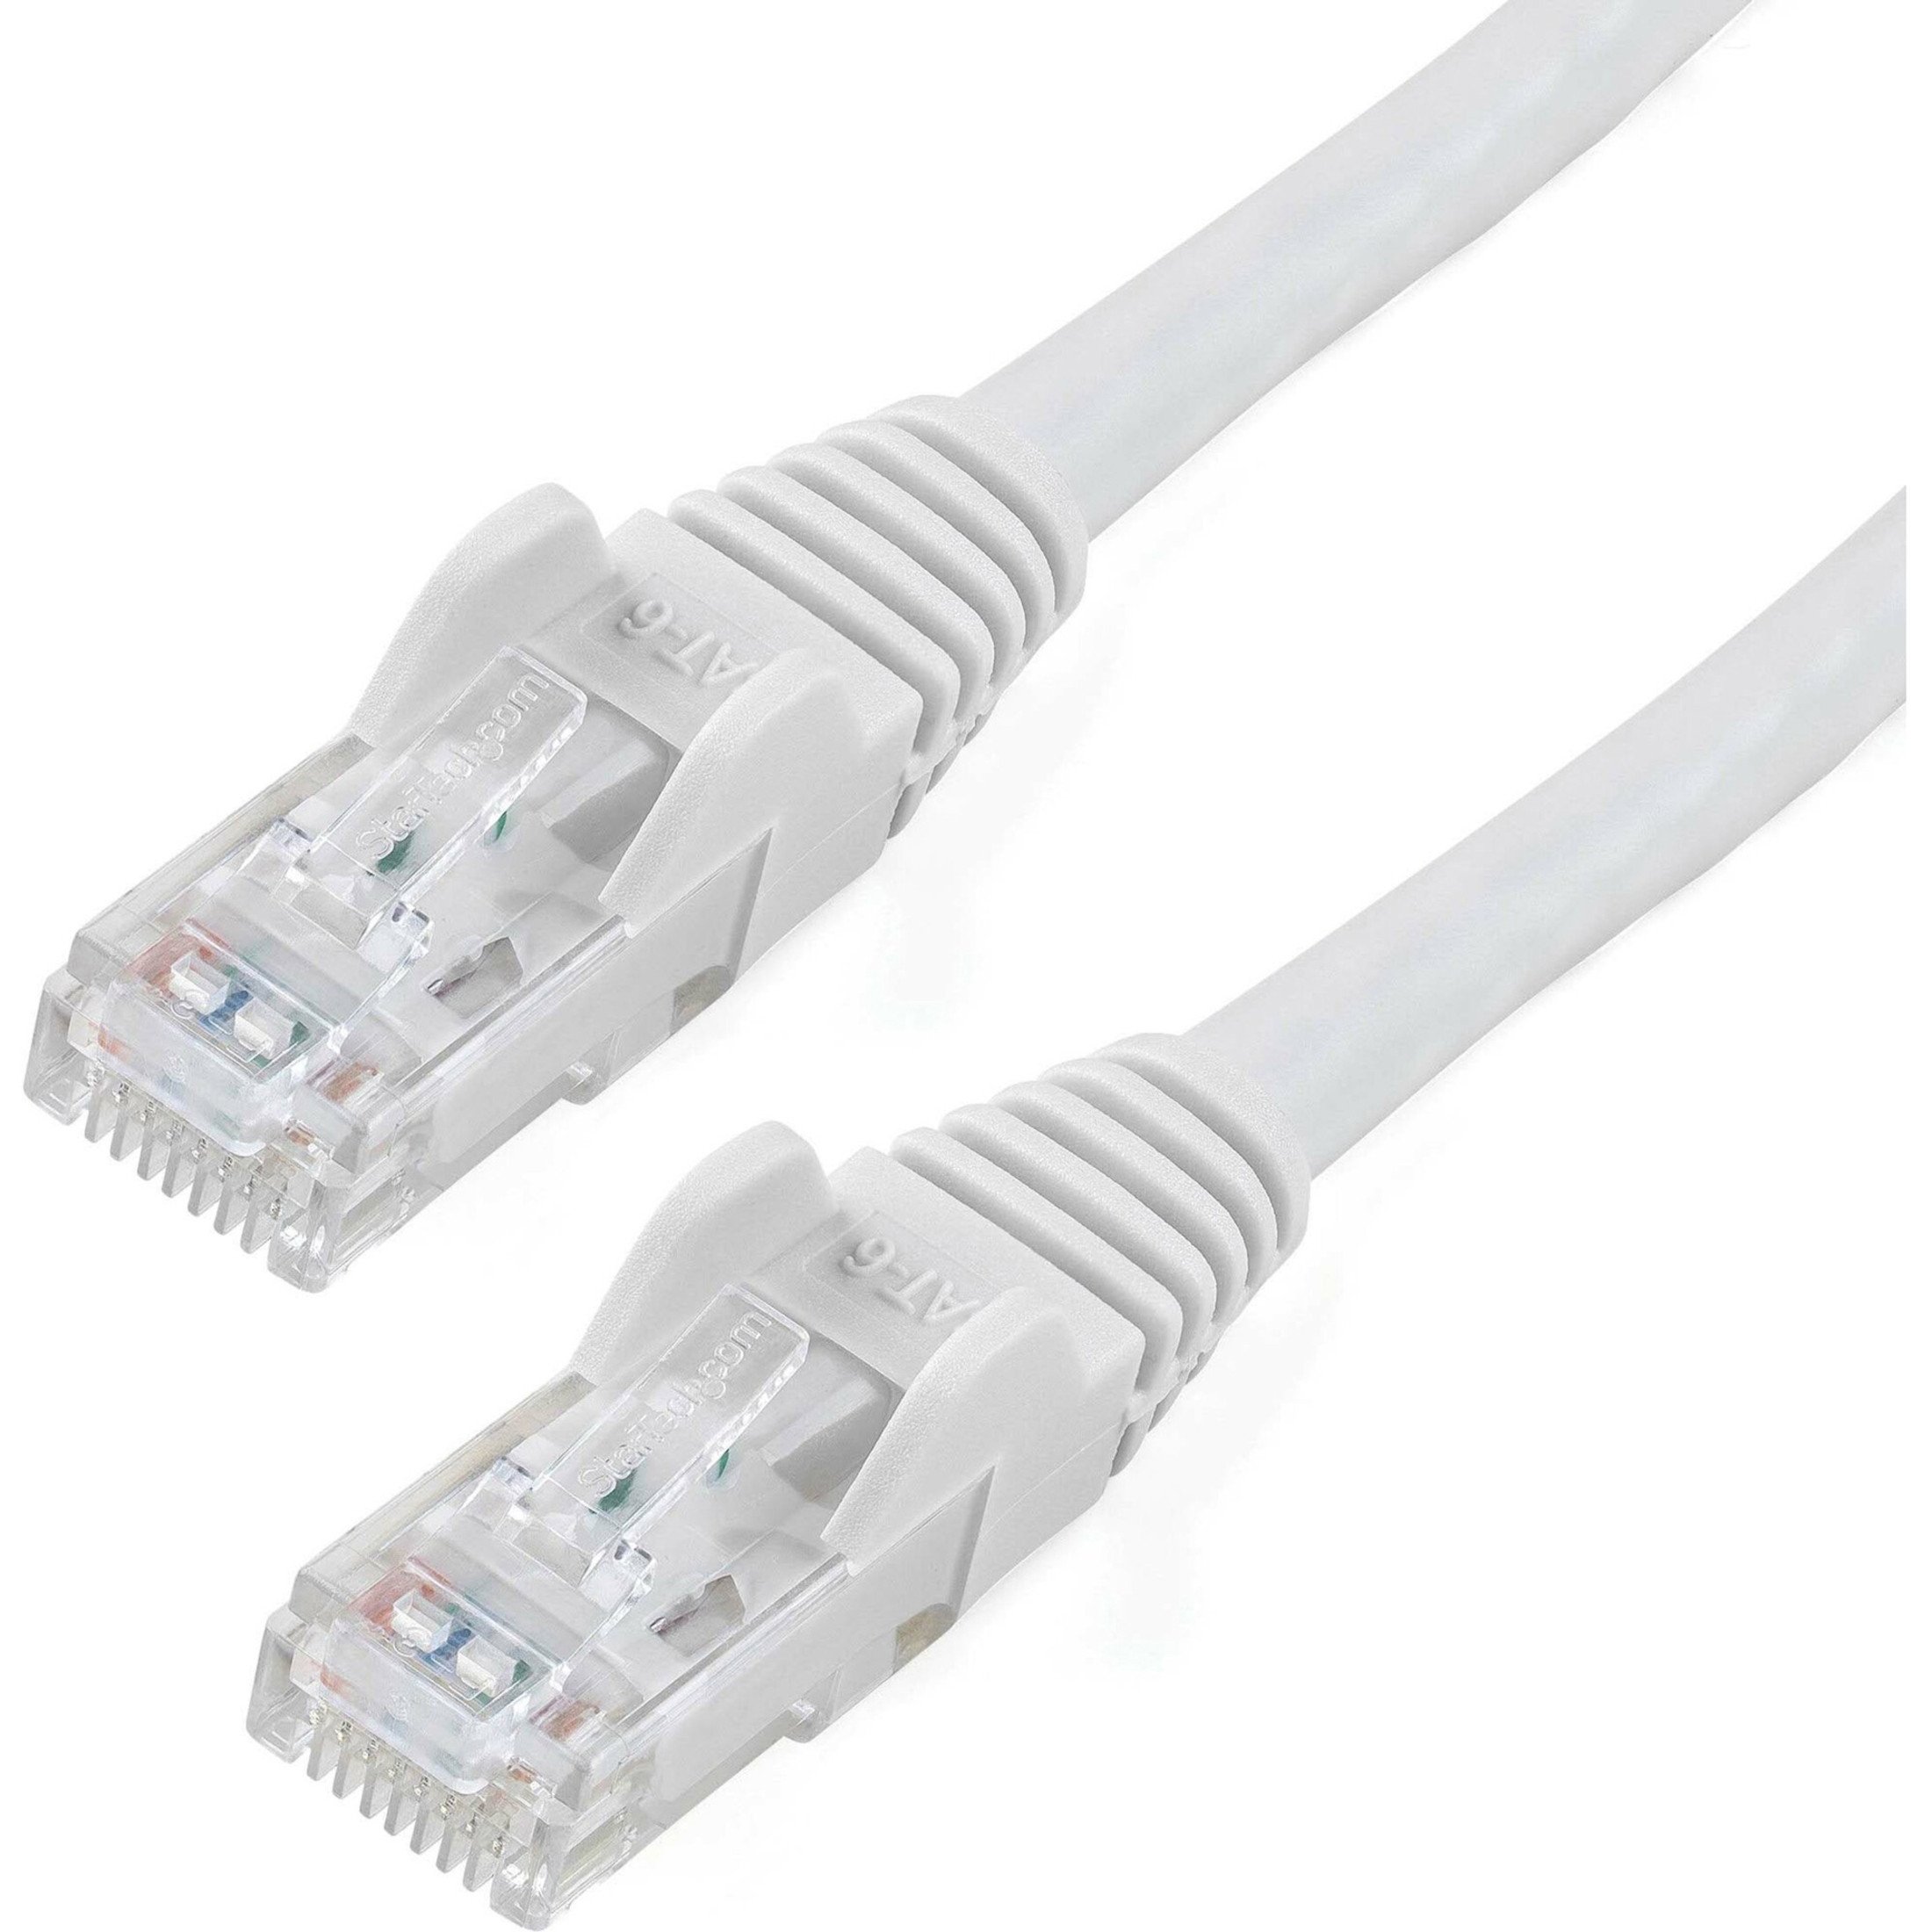 Startech .com 15ft CAT6 Ethernet CableWhite Snagless Gigabit100W PoE UTP 650MHz Category 6 Patch Cord UL Certified Wiring/TIA15ft Wh… N6PATCH15WH